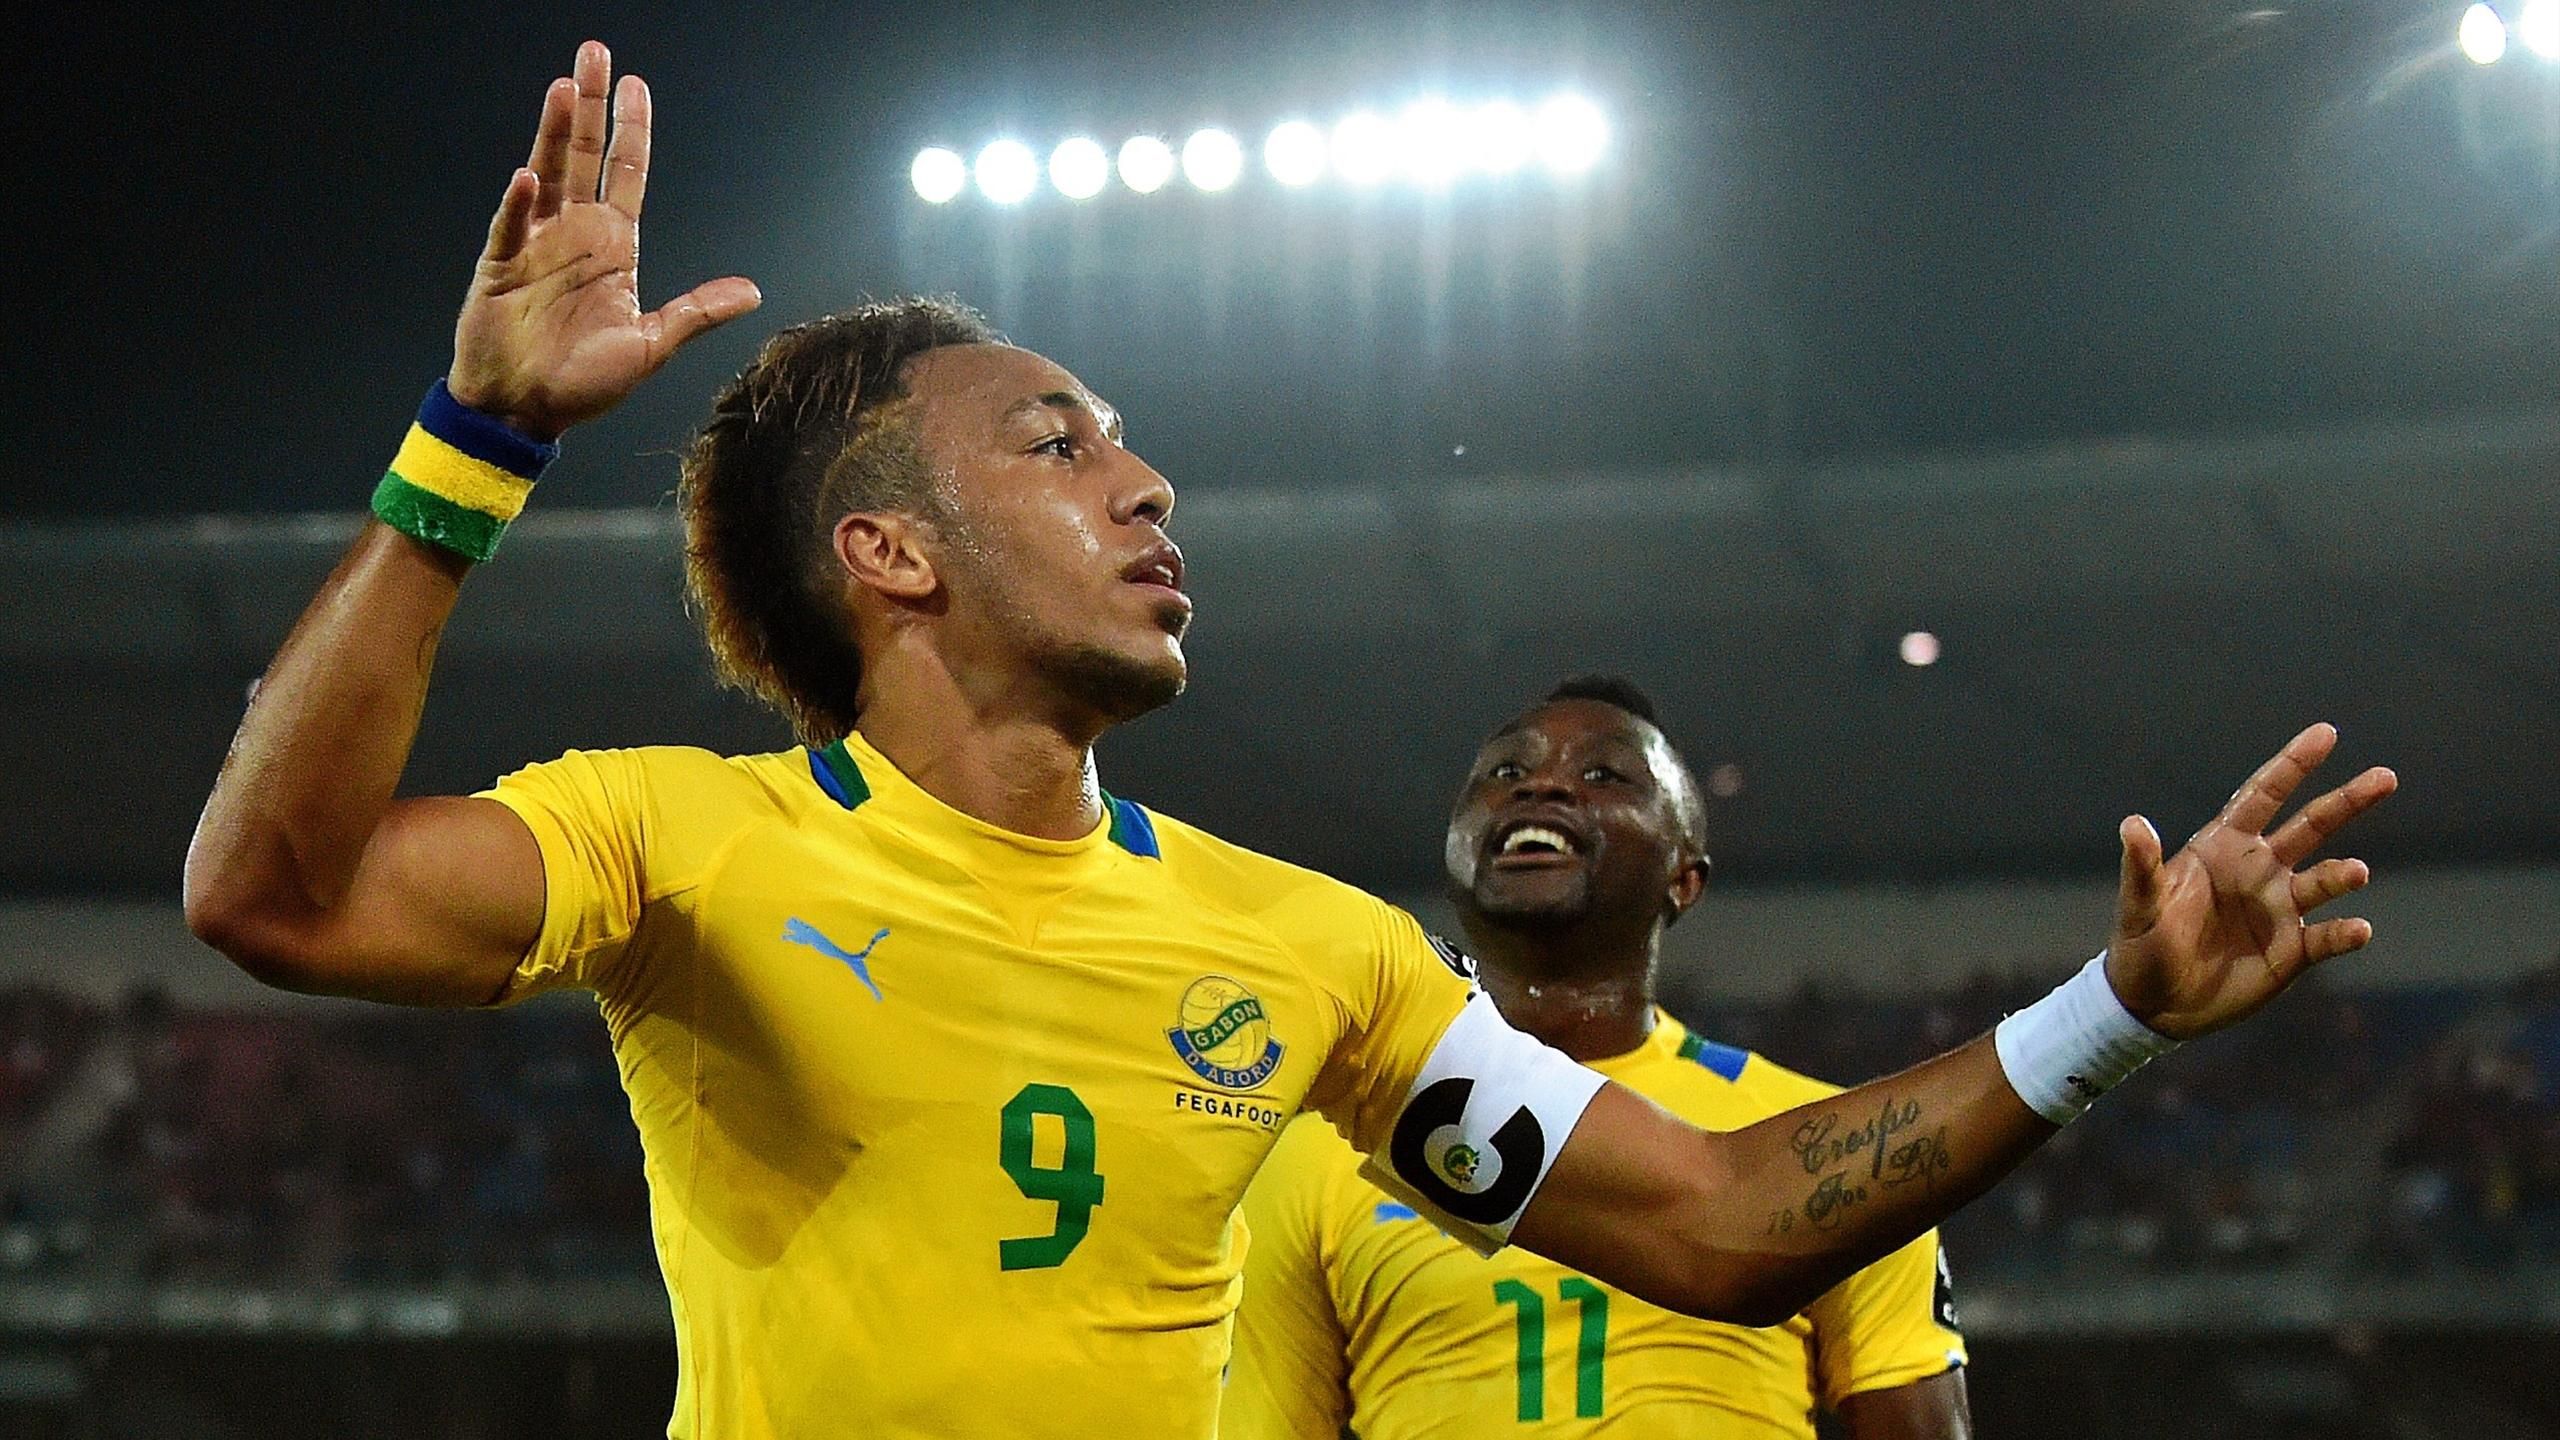 Pierre-Emerick Aubameyang: Arsenal star Aubameyang is among three Gabon players with heart issues after contracting COVID-19